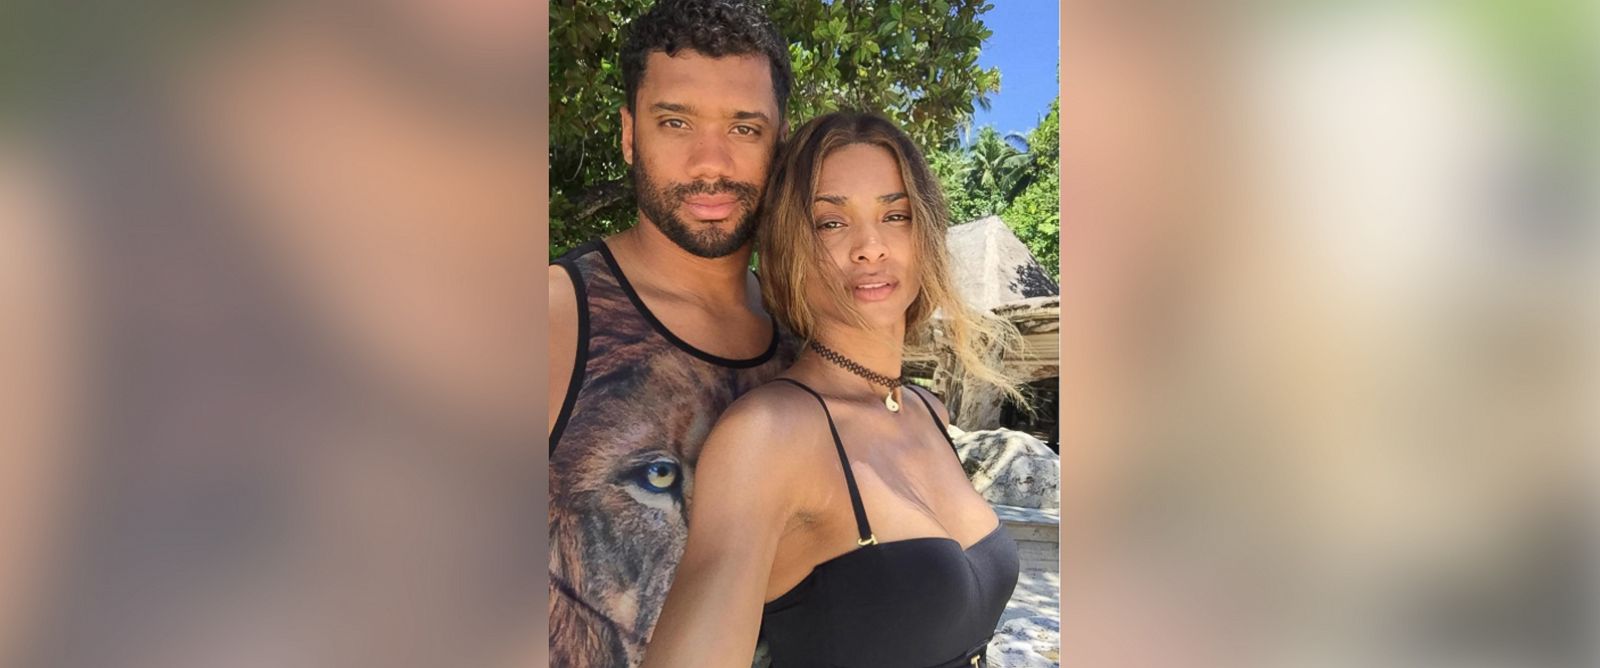 PHOTO: Ciara posted this photo of herself and Russell Wilson to her Instagram account on March 13, 2016